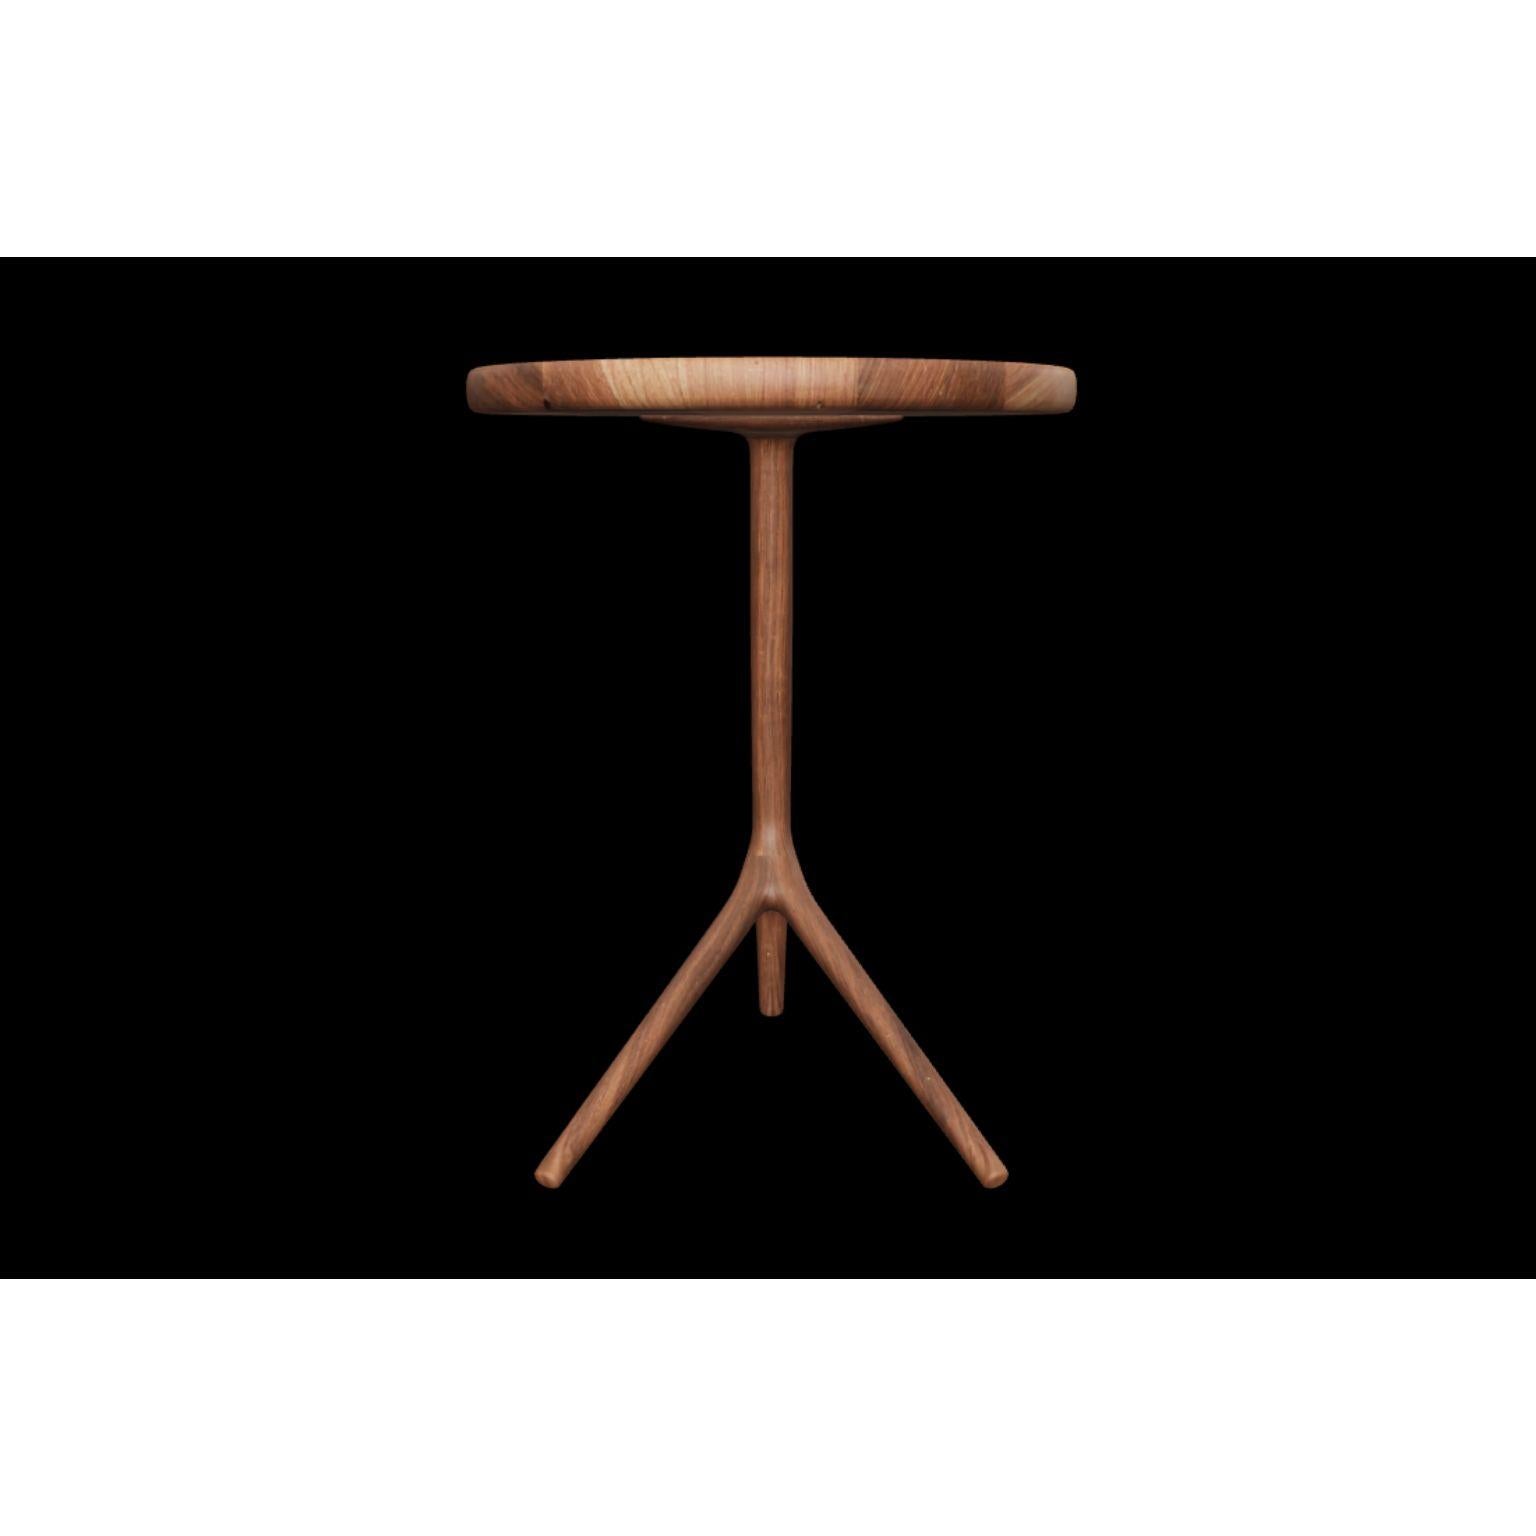 Walnut short tripod table by Fernweh Woodworking
Dimensions: Ø 40.7 x H 50.8 cm 
Materials: Walnut

Different size and wood options available. 
Size options: 
Short: Ø 40.7 x H 50.8 cm 
Medium: Ø 40.7 x H 57.2 cm 
Tall: Ø 40.7 x H 63.5